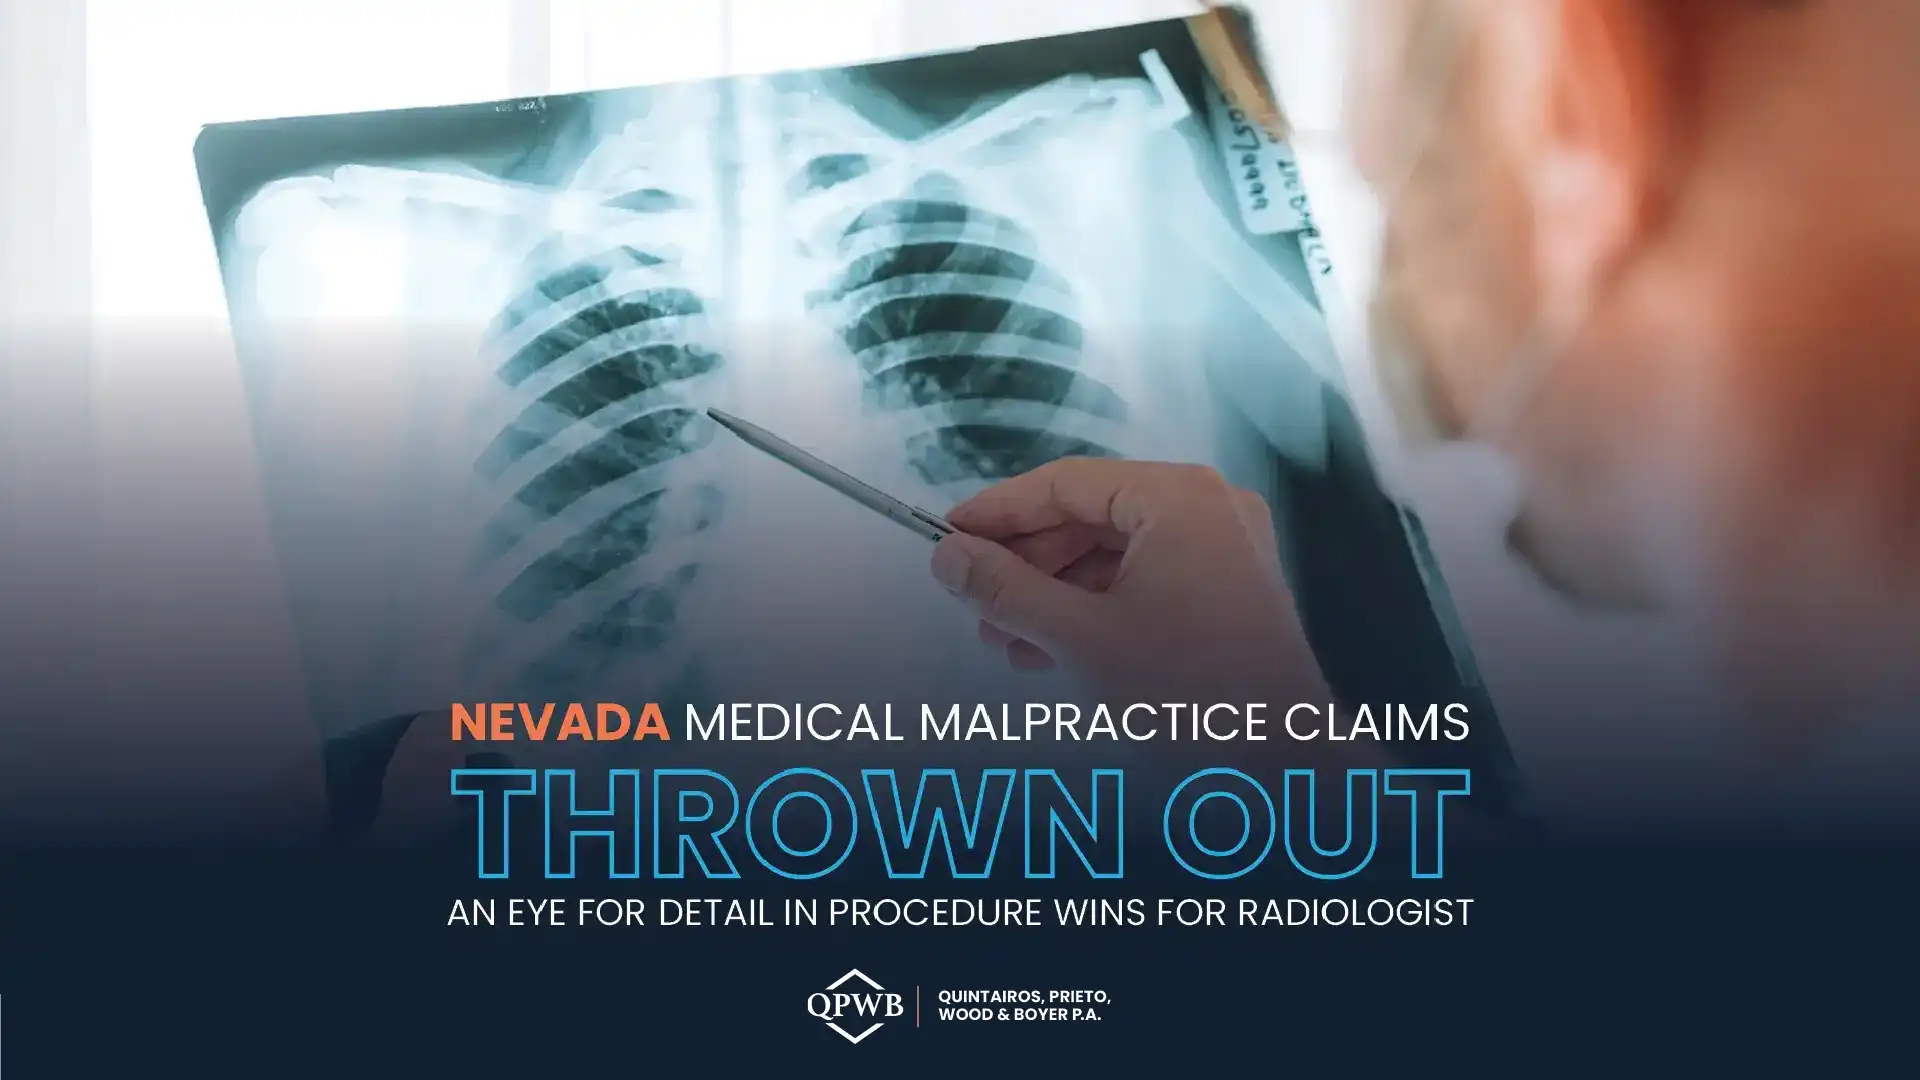 Nevada Medical Malpractice Claims Thrown Out, An Eye for Detail in Procedure Wins for Radiologist